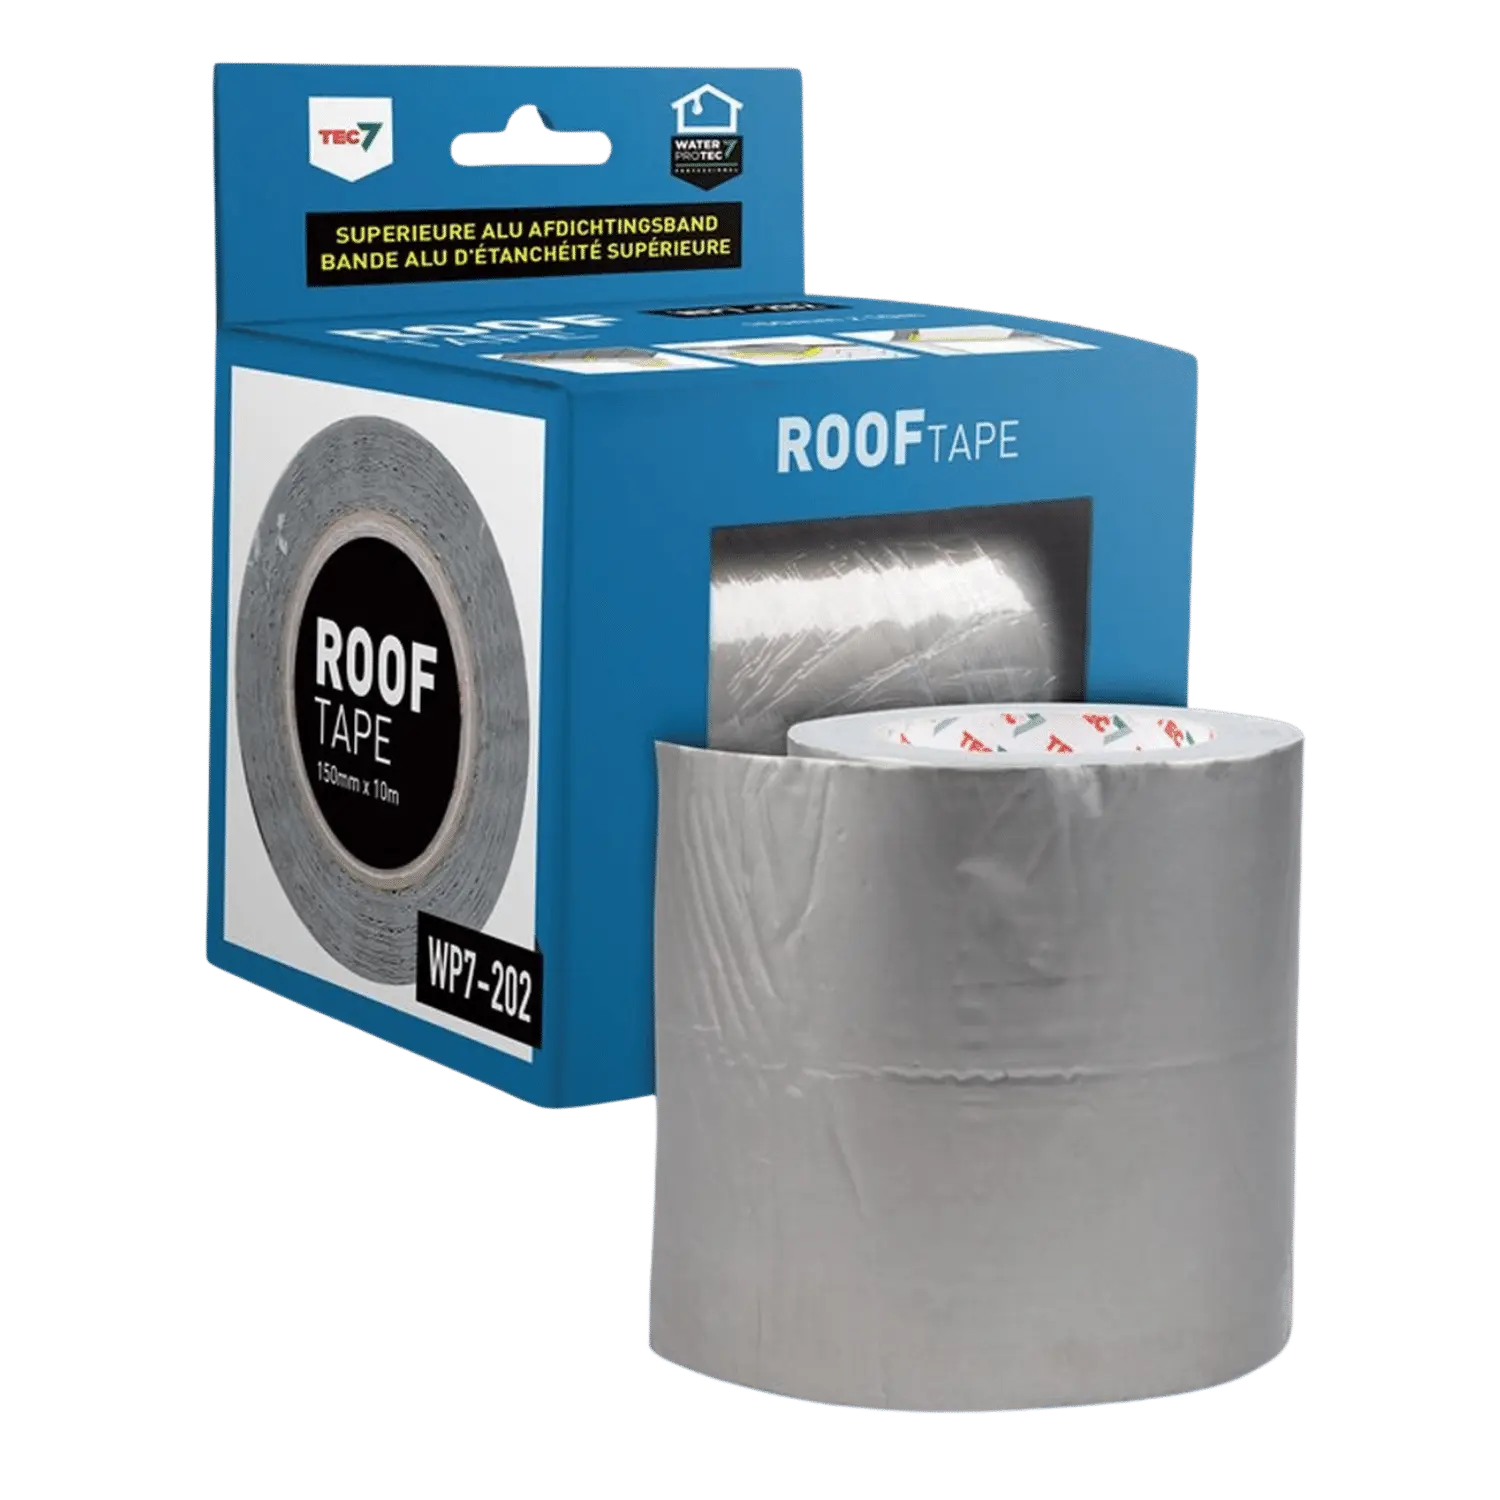 WP7-202 Roof tape 150mmx10m